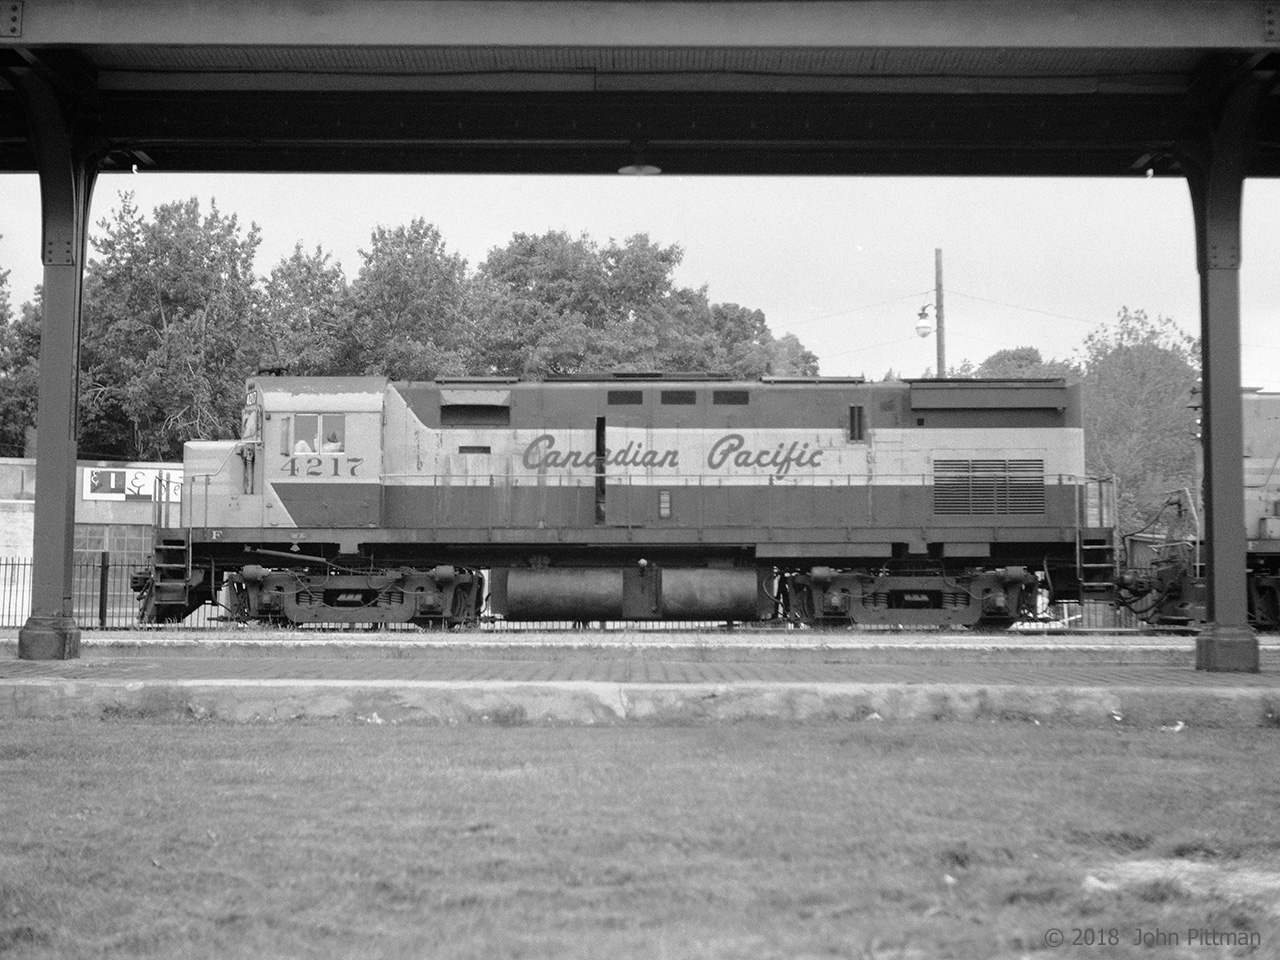 Framed by the platform canopy, MLW C424 CP 4217 leads the afternoon freight from Trois-Rivieres to Montreal with a CP RS-18 next. The maroon and grey paint looks very clean; CP 4217 was then 5 years old.